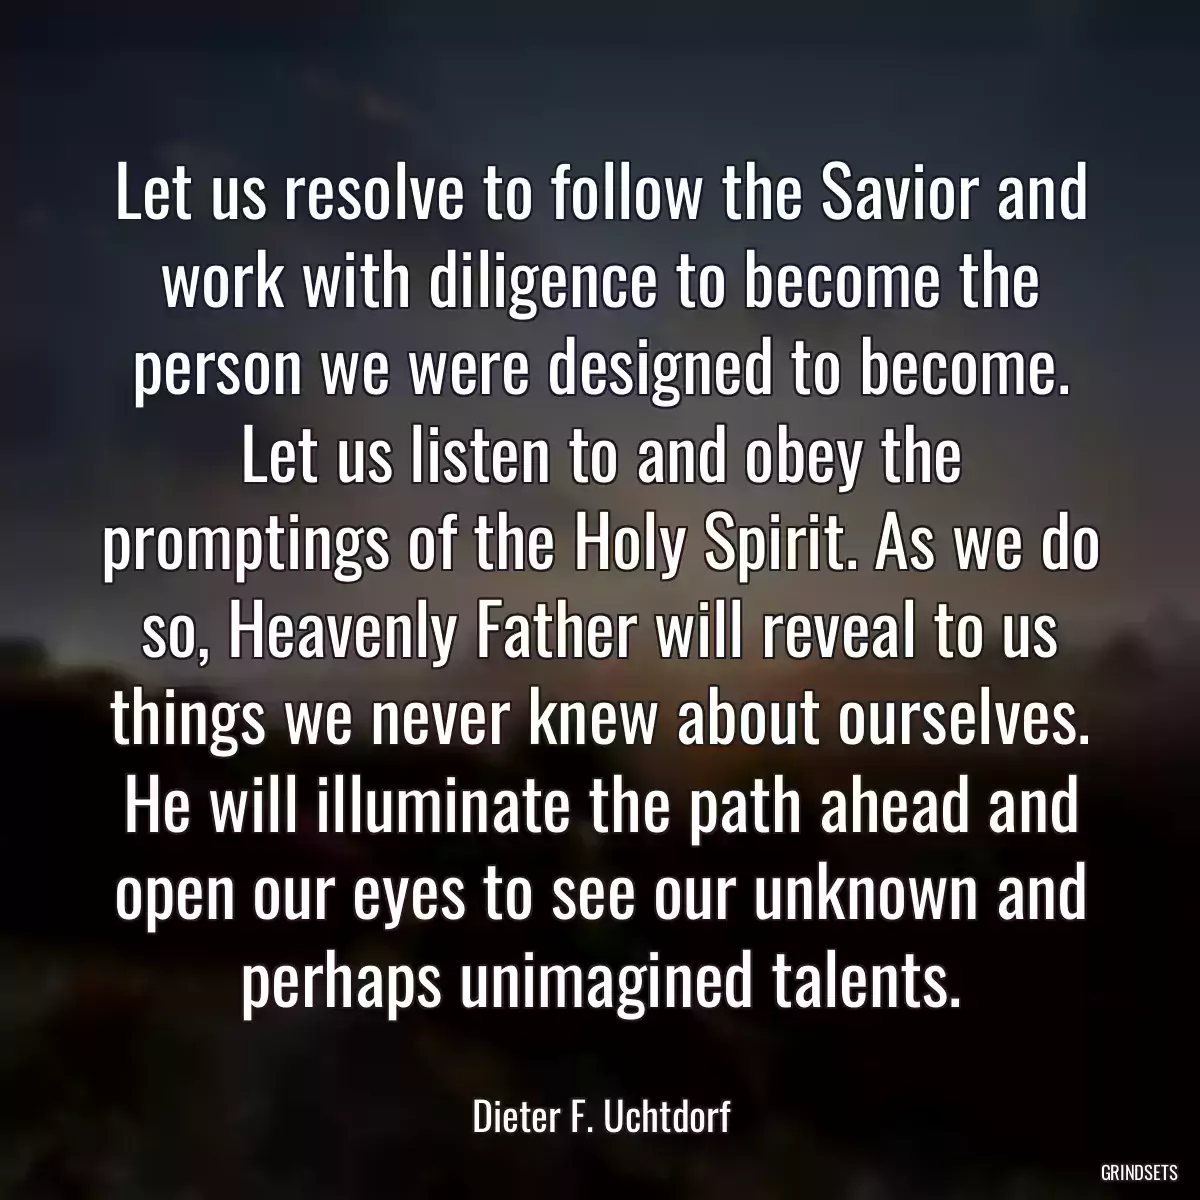 Let us resolve to follow the Savior and work with diligence to become the person we were designed to become. Let us listen to and obey the promptings of the Holy Spirit. As we do so, Heavenly Father will reveal to us things we never knew about ourselves. He will illuminate the path ahead and open our eyes to see our unknown and perhaps unimagined talents.